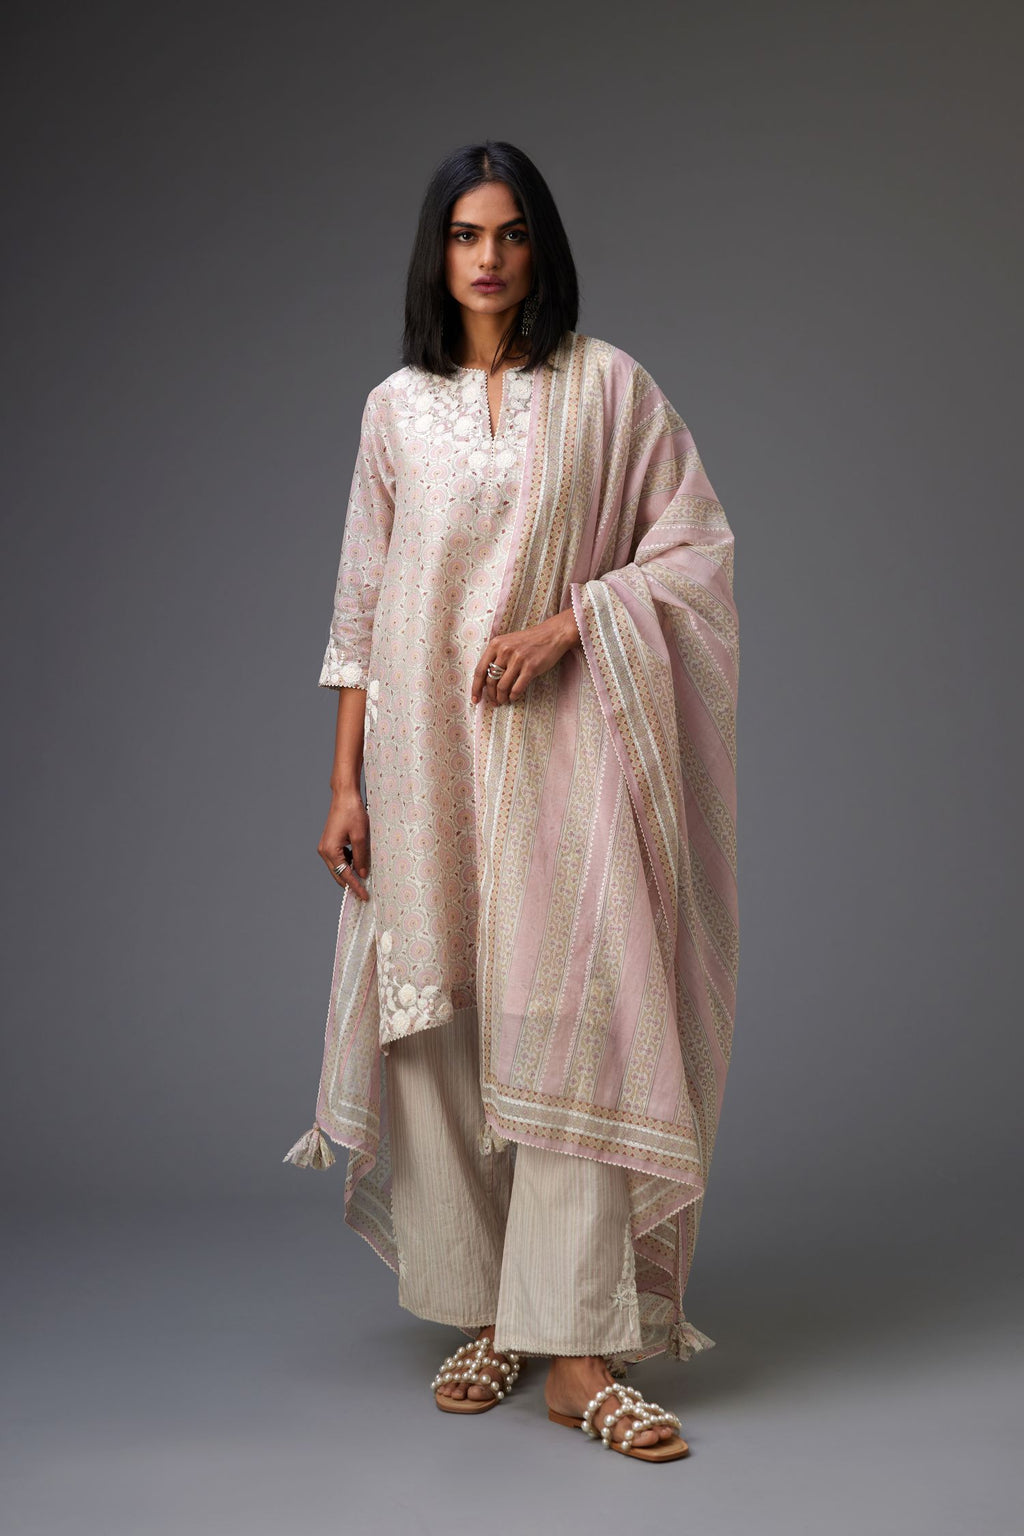 Pink & grey hand block printed Cotton Chanderi dupatta, with embroidery and ric-rac lace.